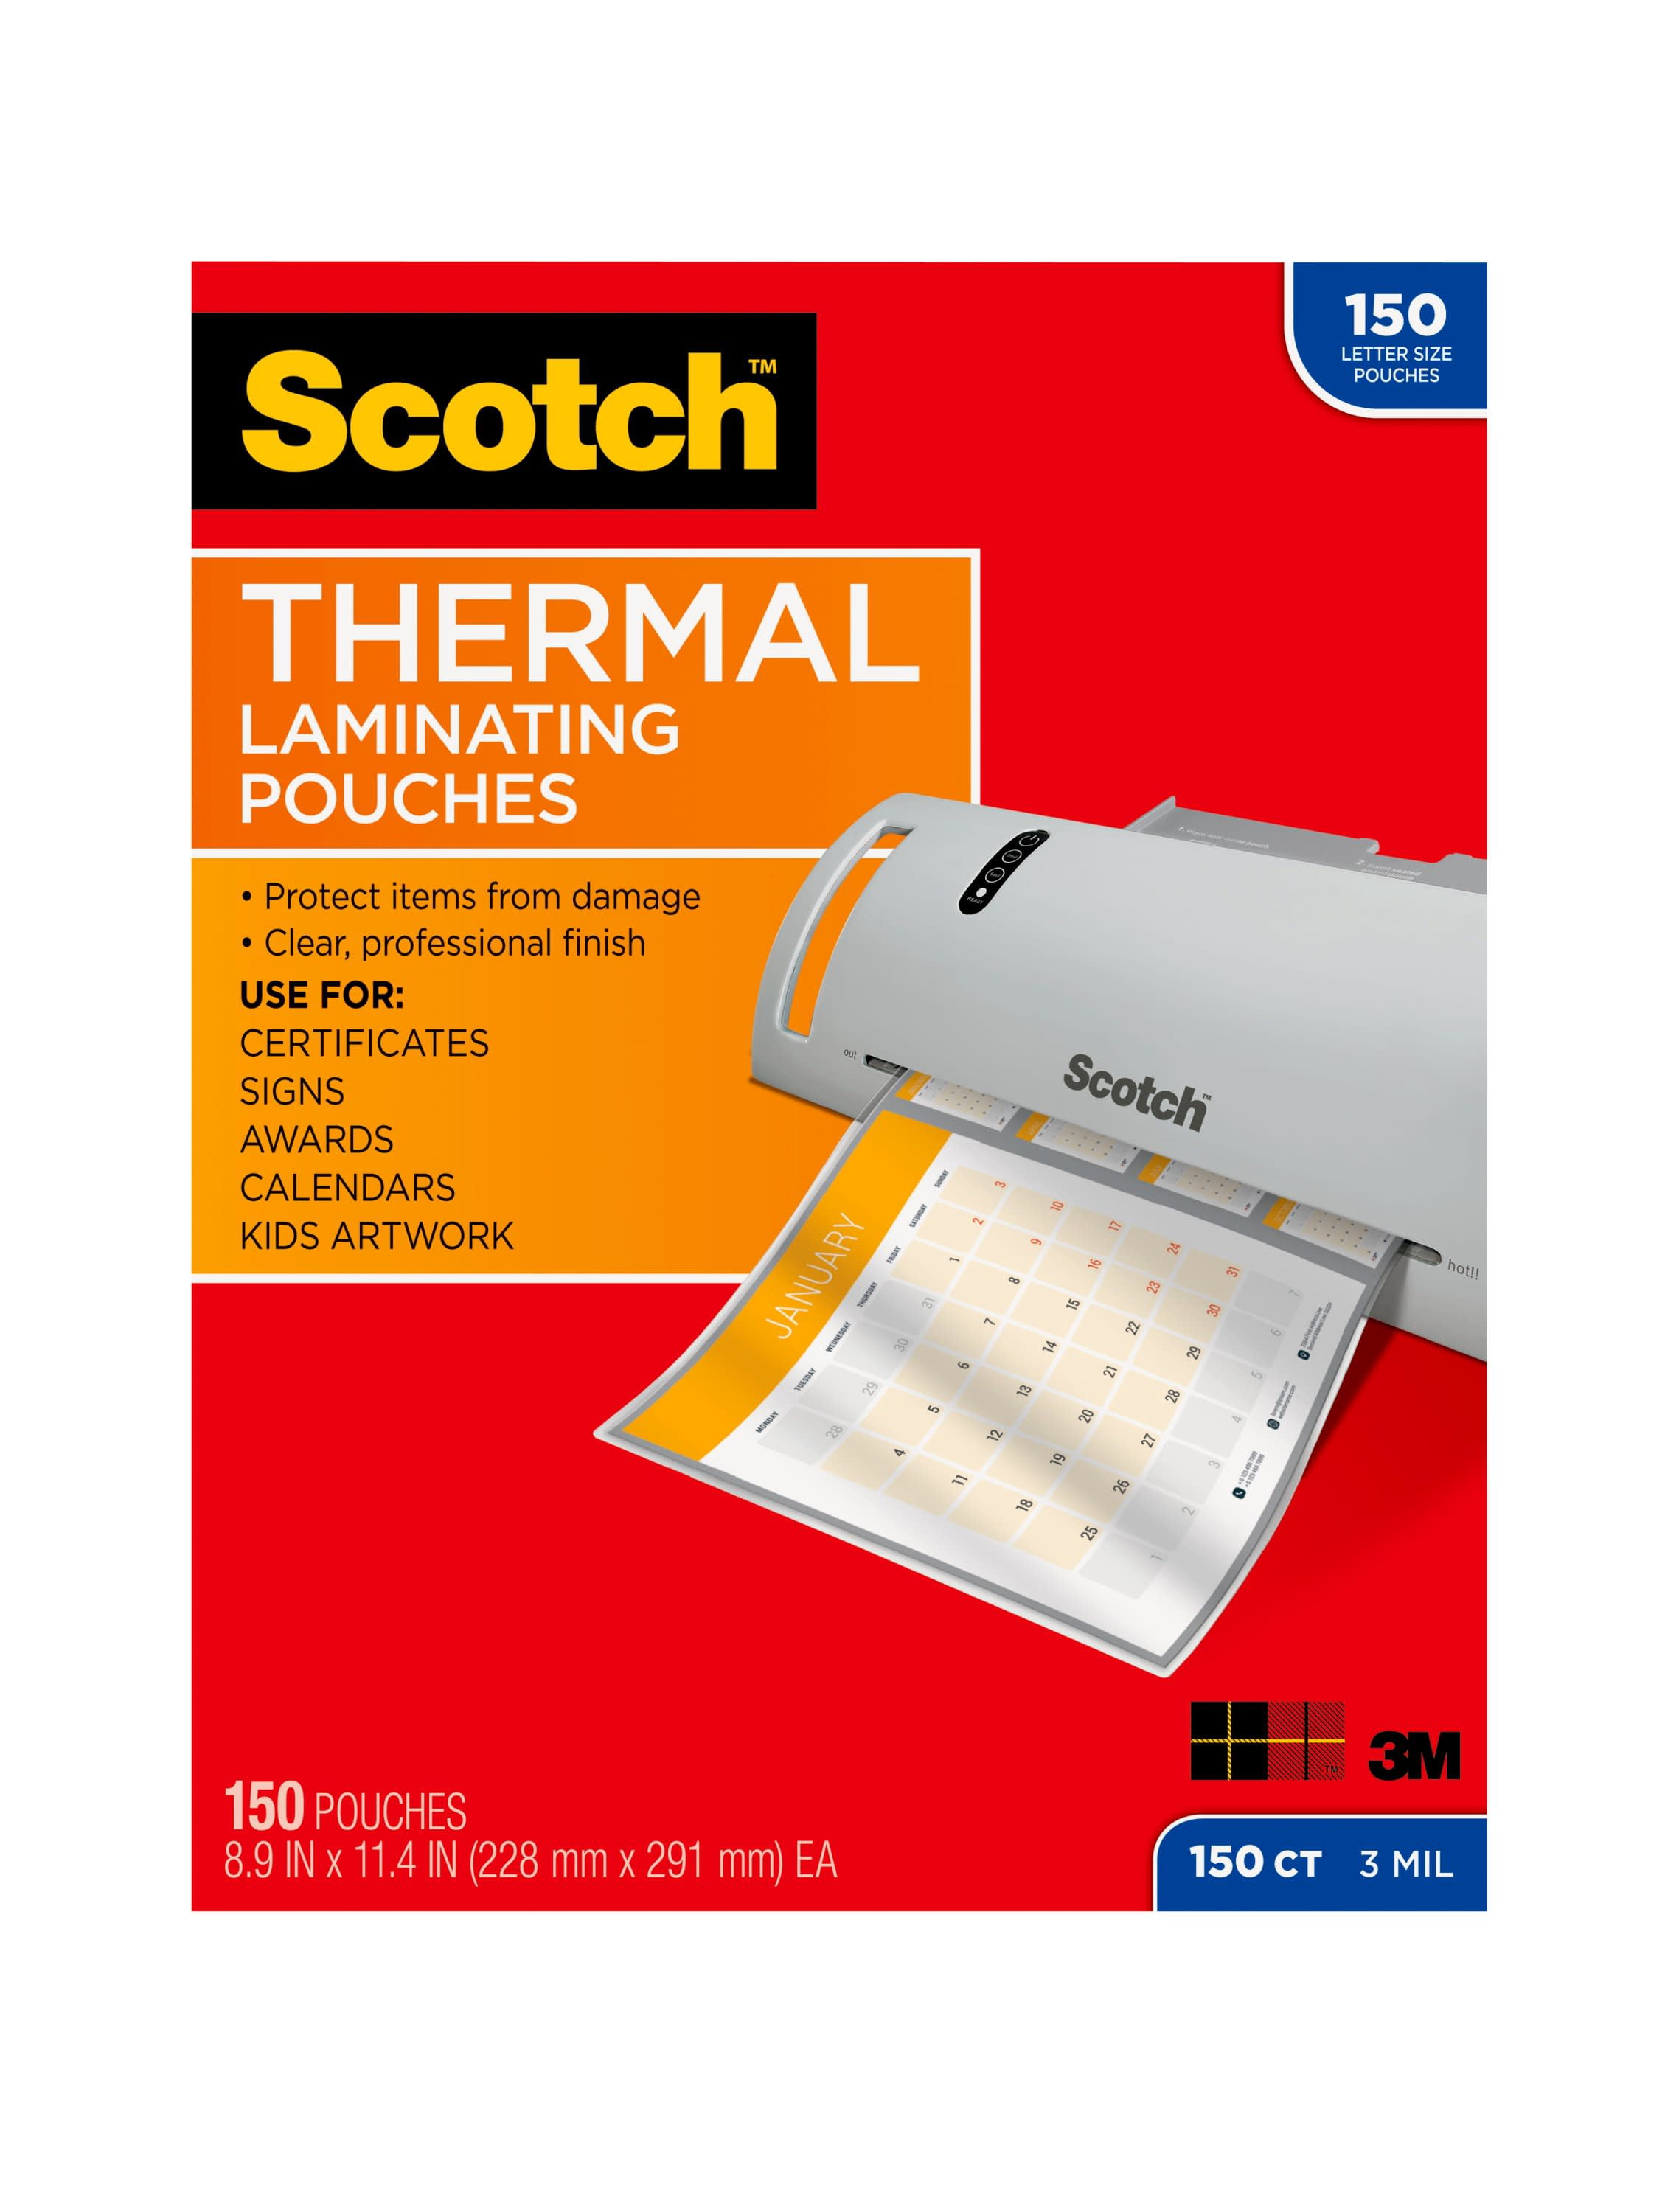 50 Scotch Thermal Laminating Pouches 2 X 4 Inch With Loops Tp5853-25 2pk of 25 for sale online 